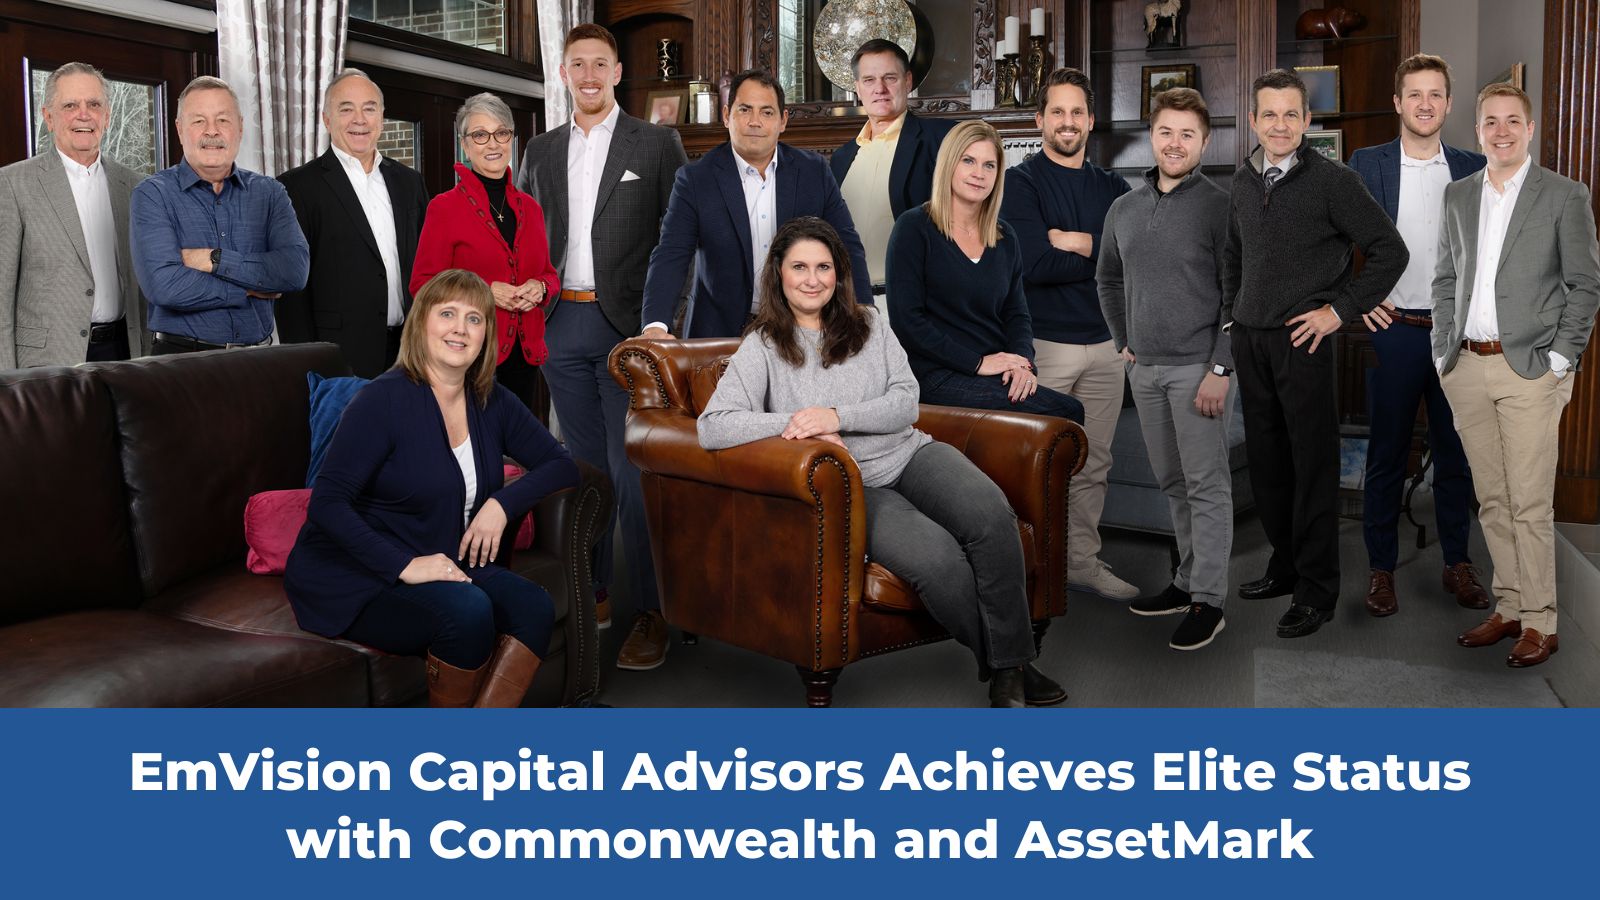 EmVision Capital Advisors Achieves Elite Status with Commonwealth and AssetMark